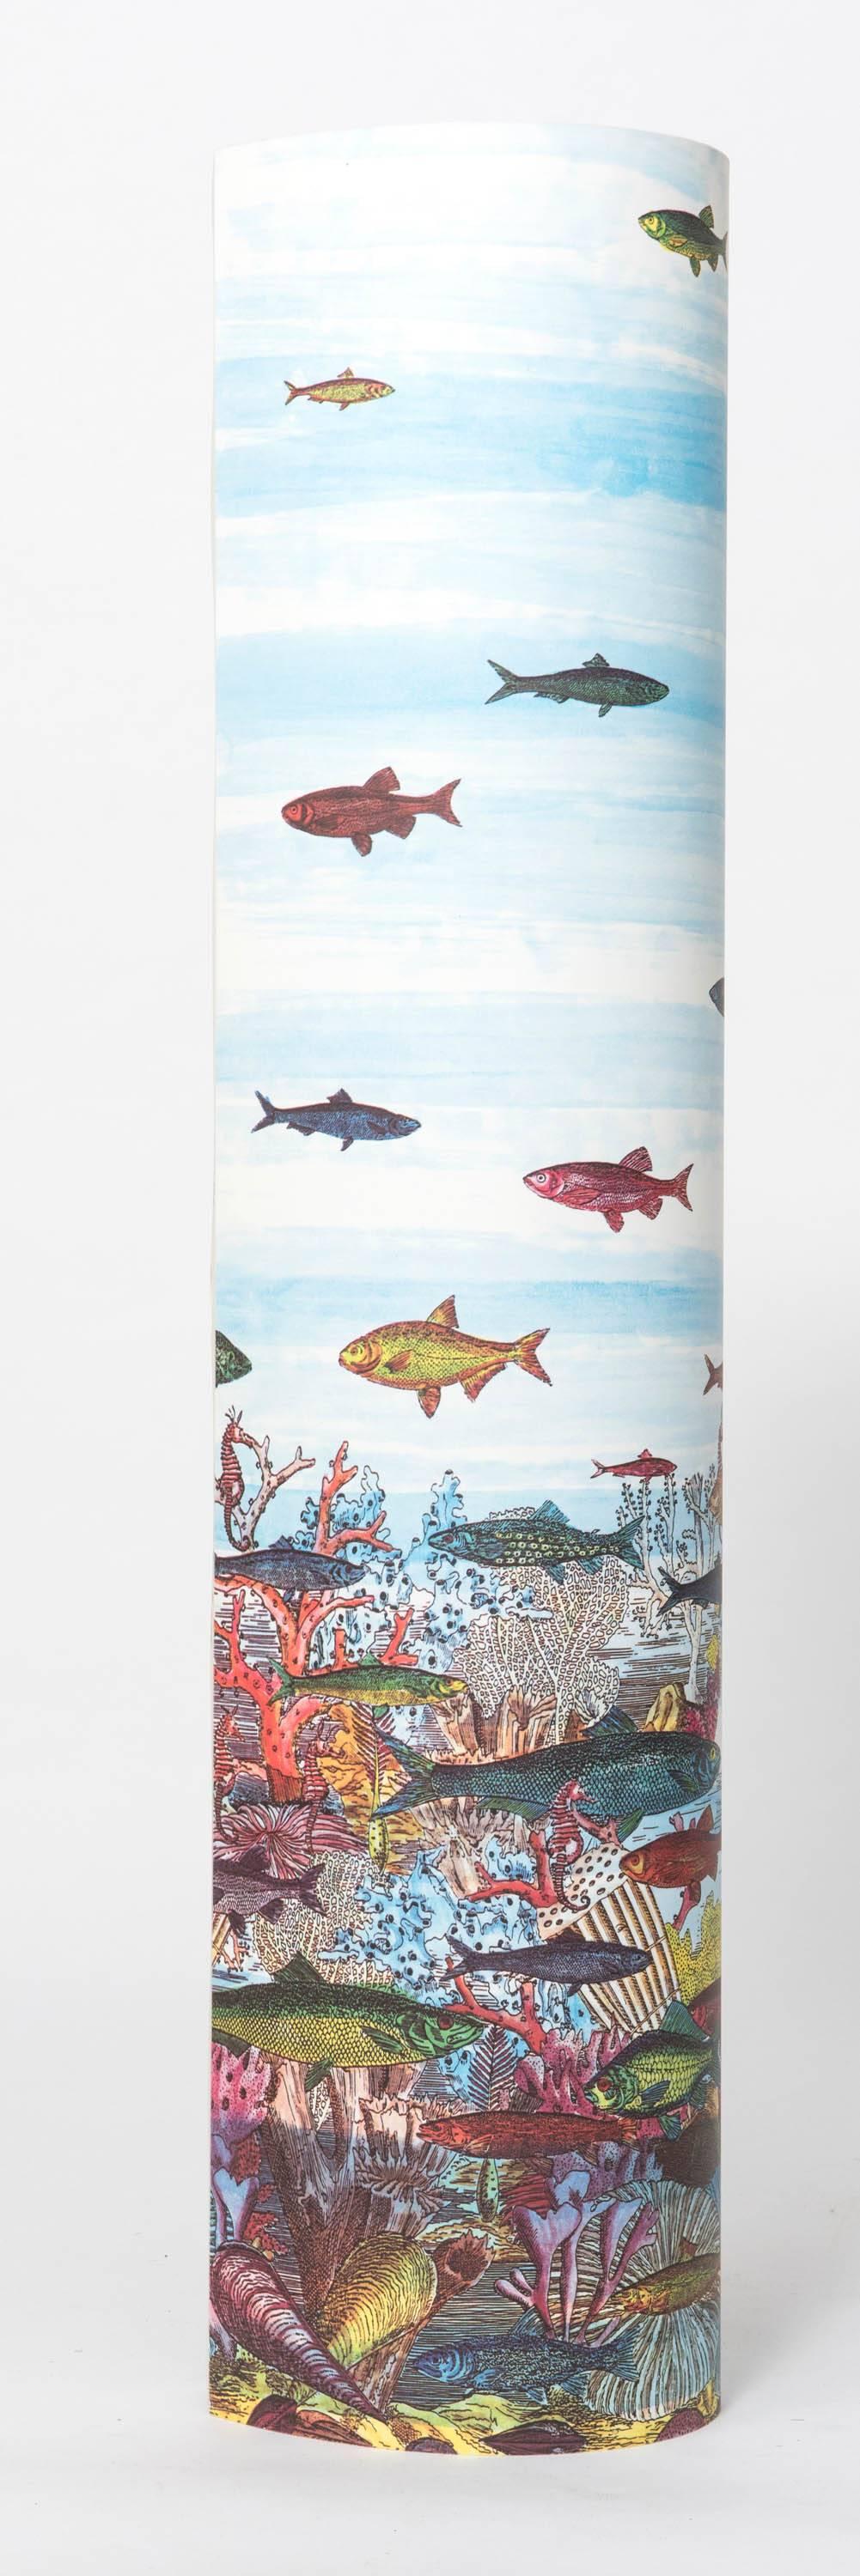 A pair of lamps by Barnaba Fornasetti.
“Aquario medio”
Printed and colored Perspex.
Made by Fornasetti and Antonangeli, Paderno Dugano.
Italy, circa 1995.
Measures: 119 cm high x 25 cm wide x 26 cm deep.
 